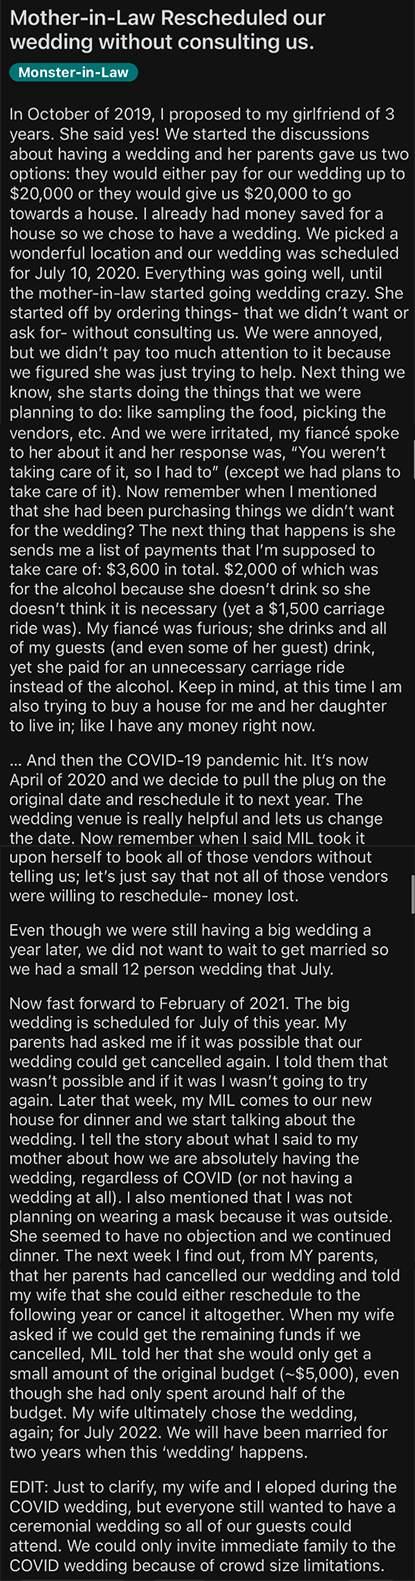 Summarized text: An article explaining a situation where a person&#x27;s mother-in-law rescheduled their wedding without consulting them